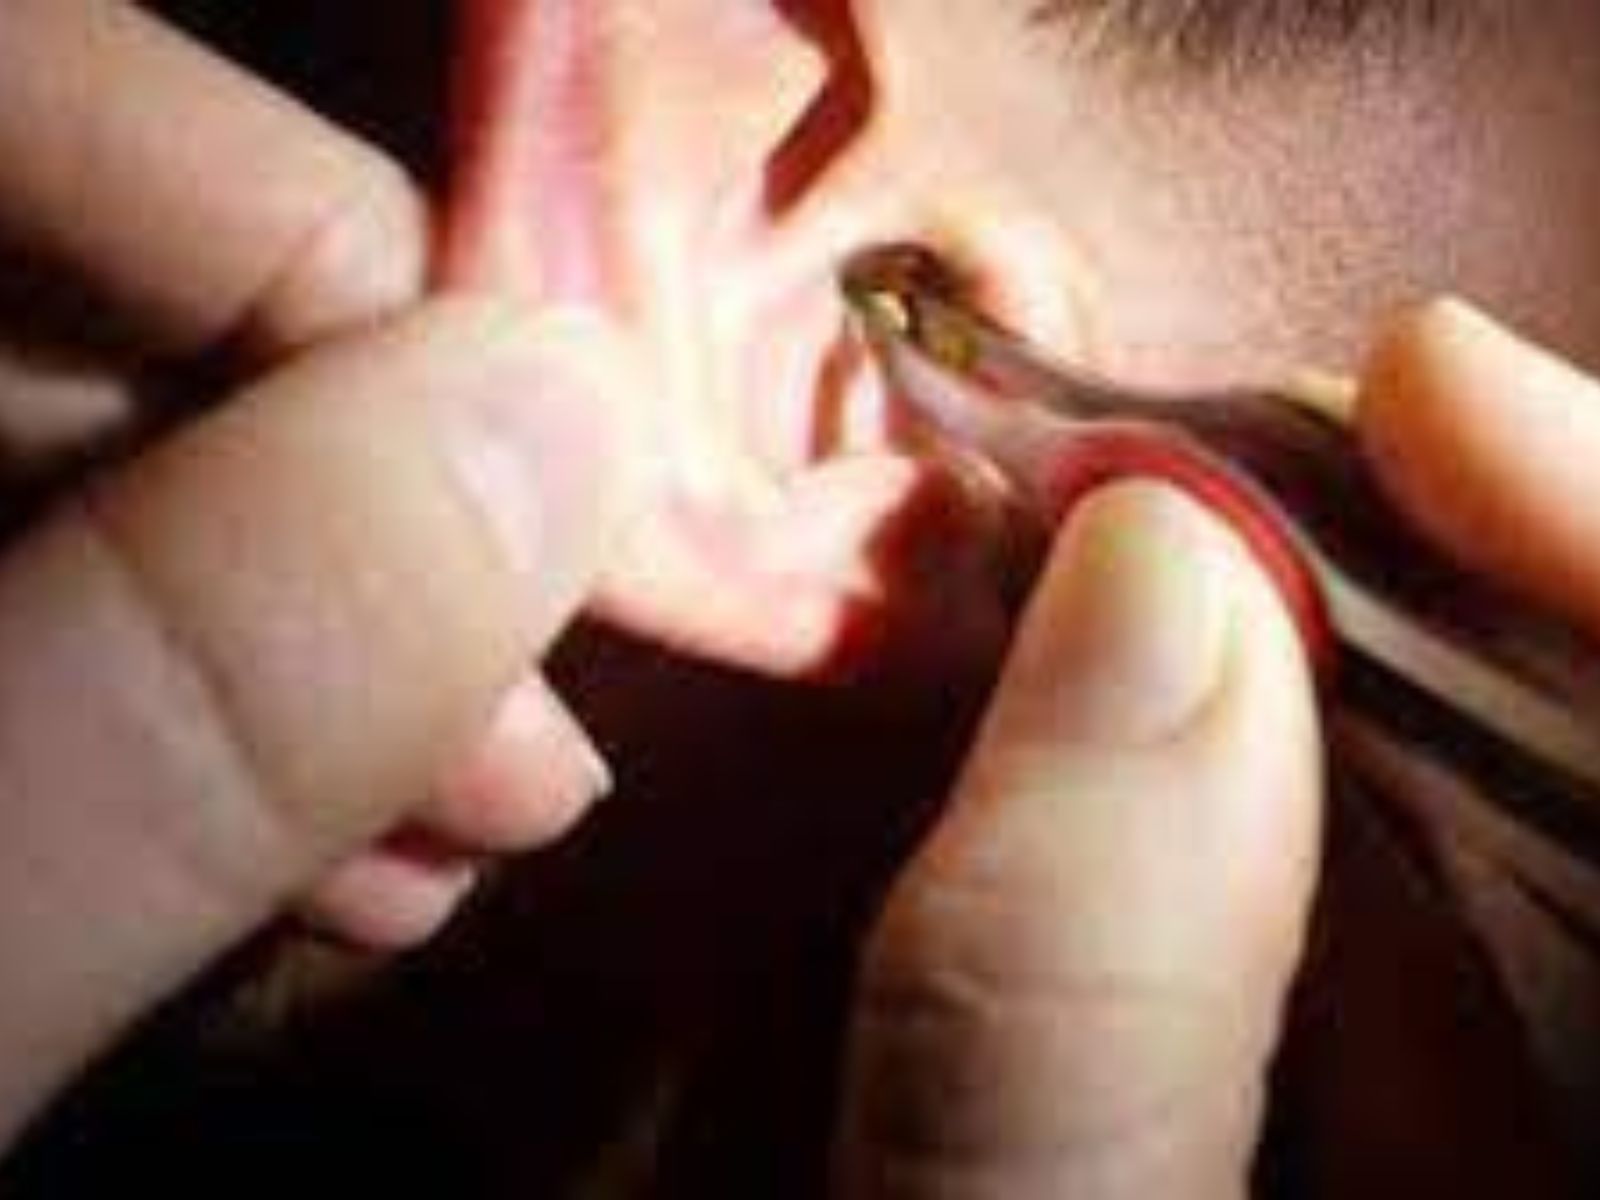 Manual Ear Wax removal for patient from Lambley